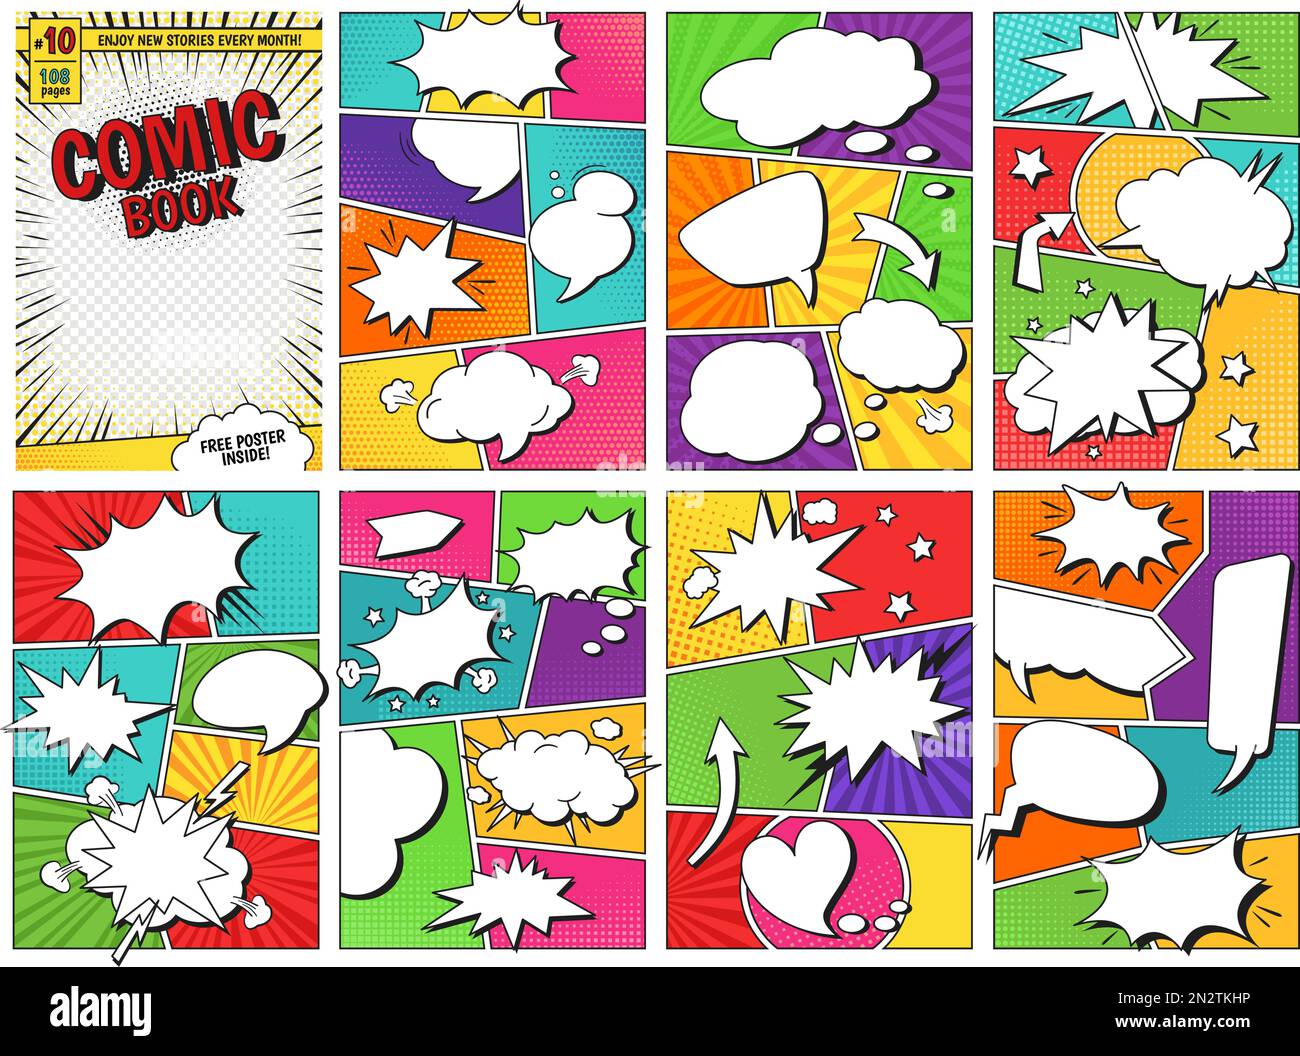 Comic book templates. Comics magazine cover and pages grid layouts with speech balloon frames vector set Stock Vector